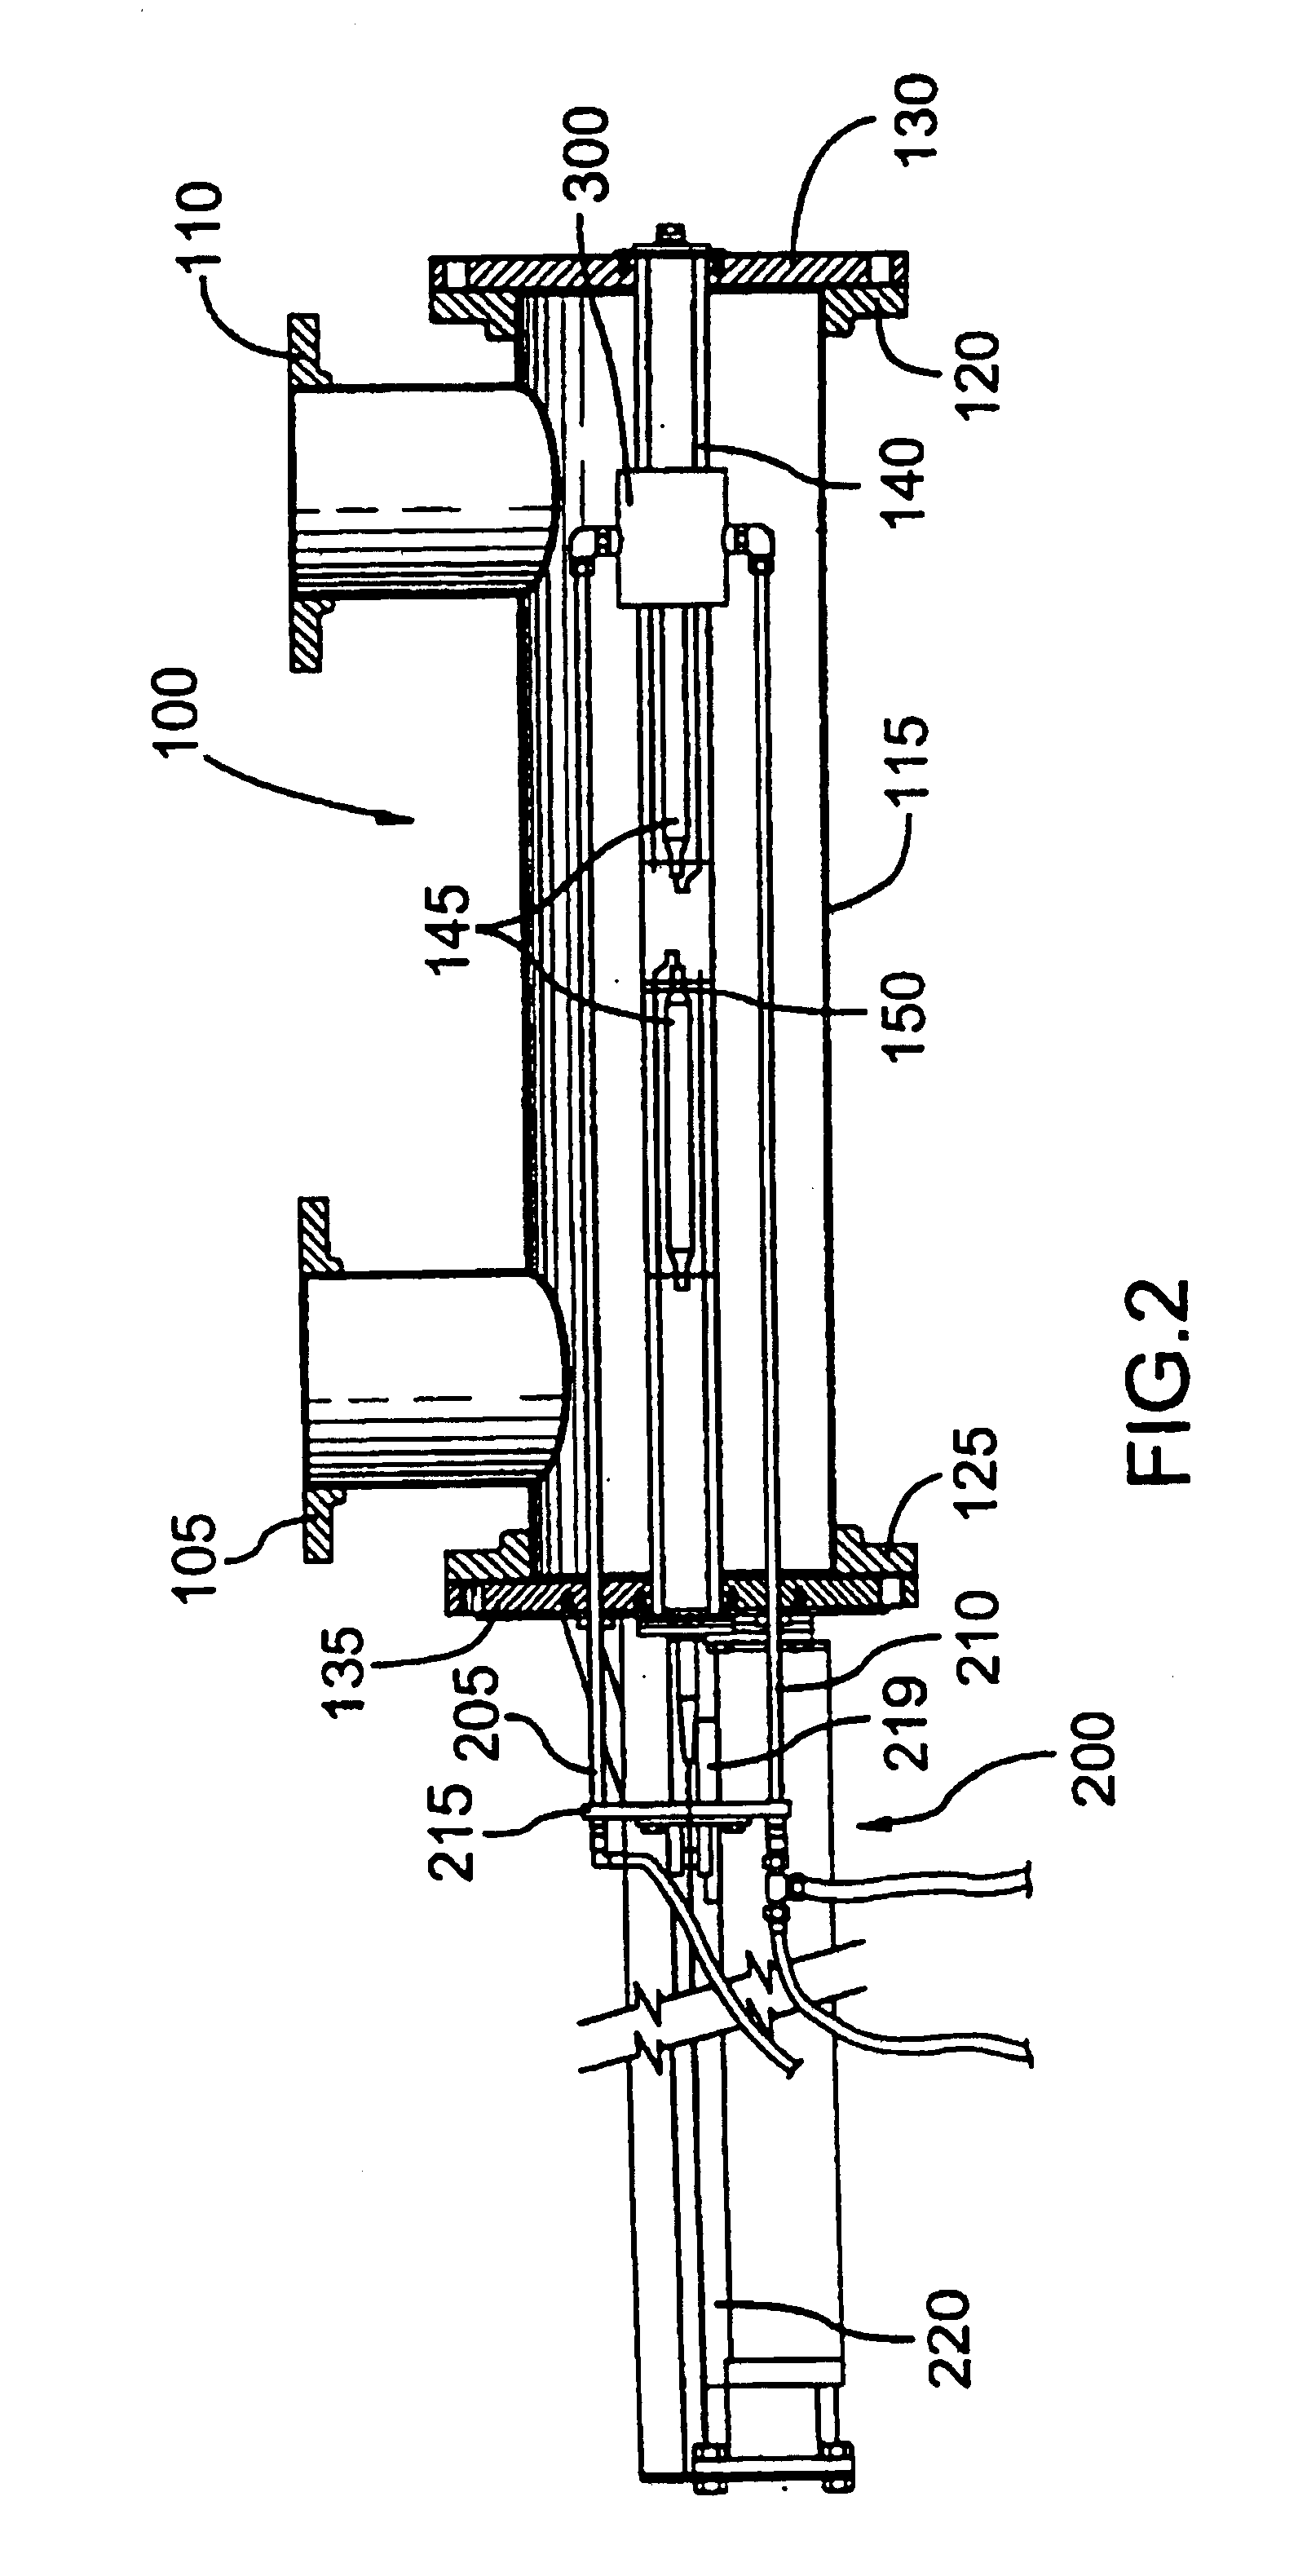 Fluid treatment system and cleaning apparatus therefor